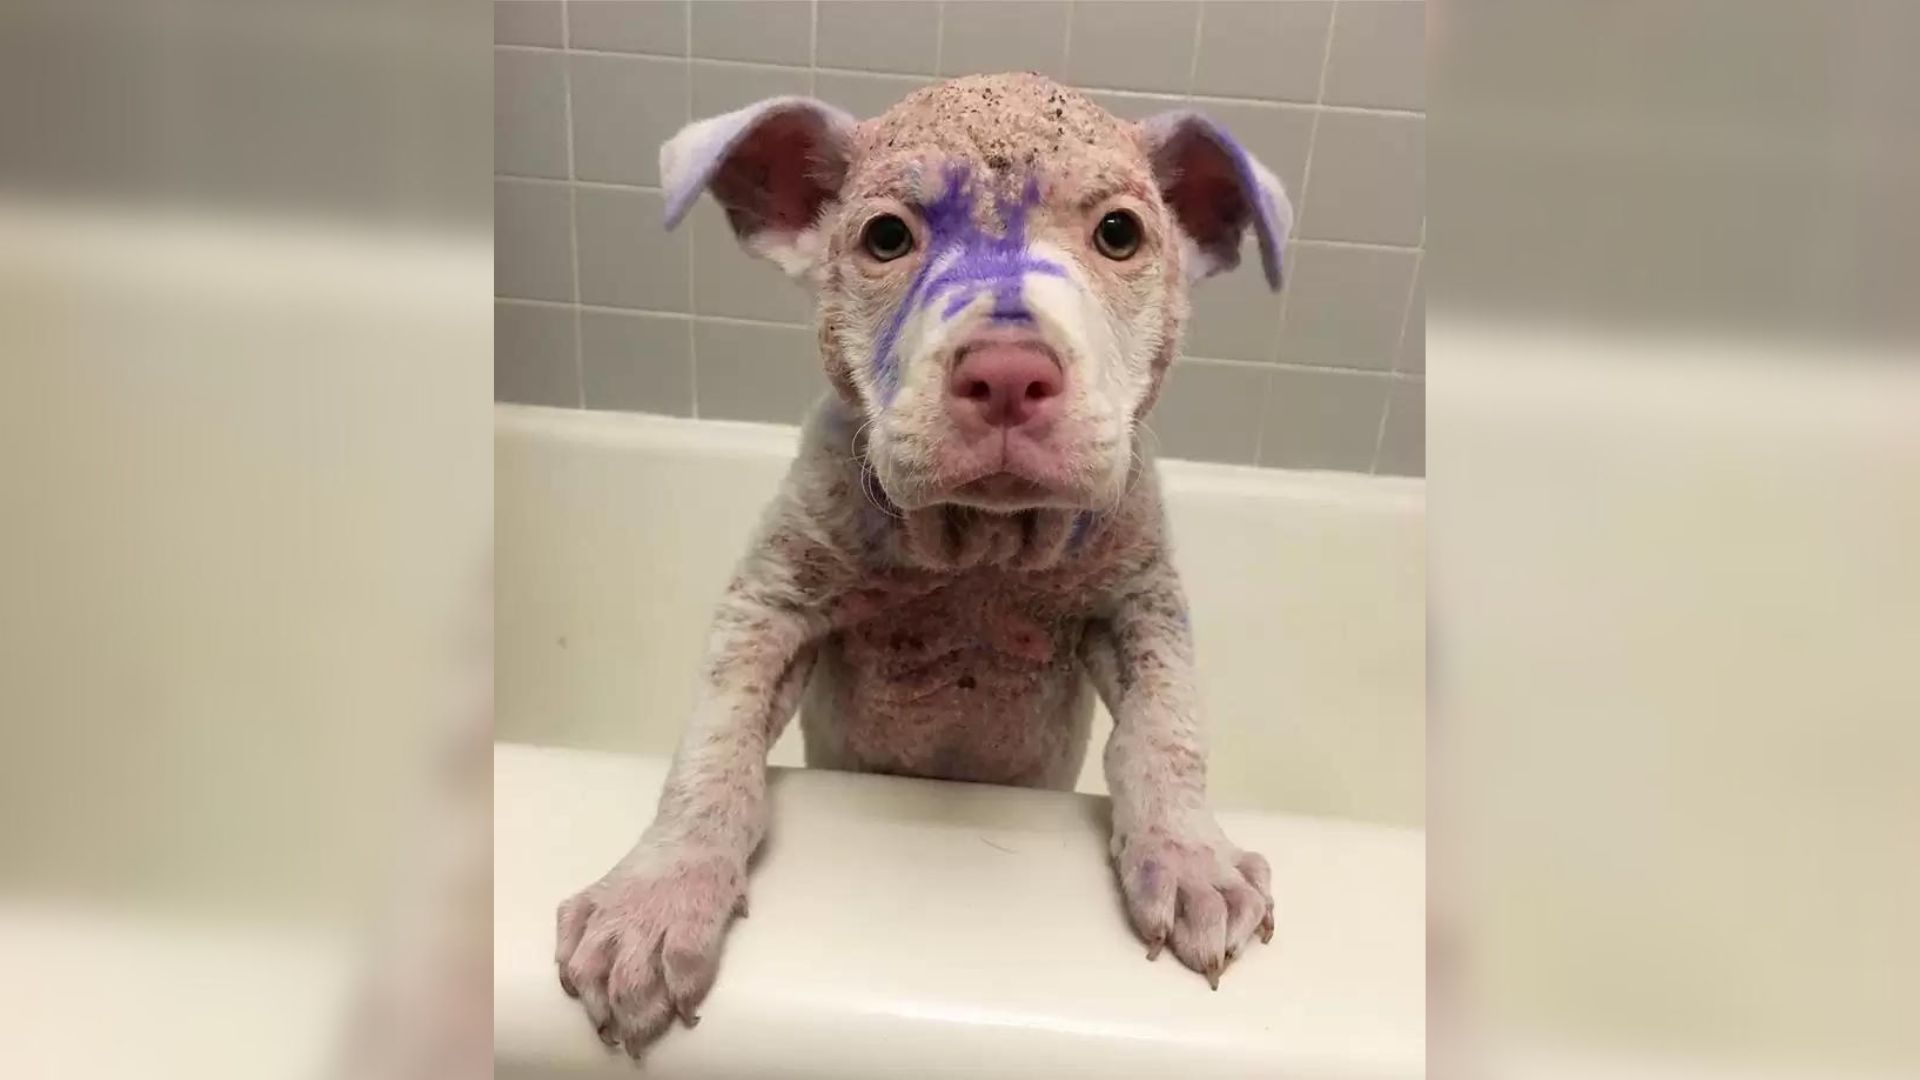 A Kind-Hearted Human Saves A Hairless Little Puppy Who Was Covered In Mysterious Paint